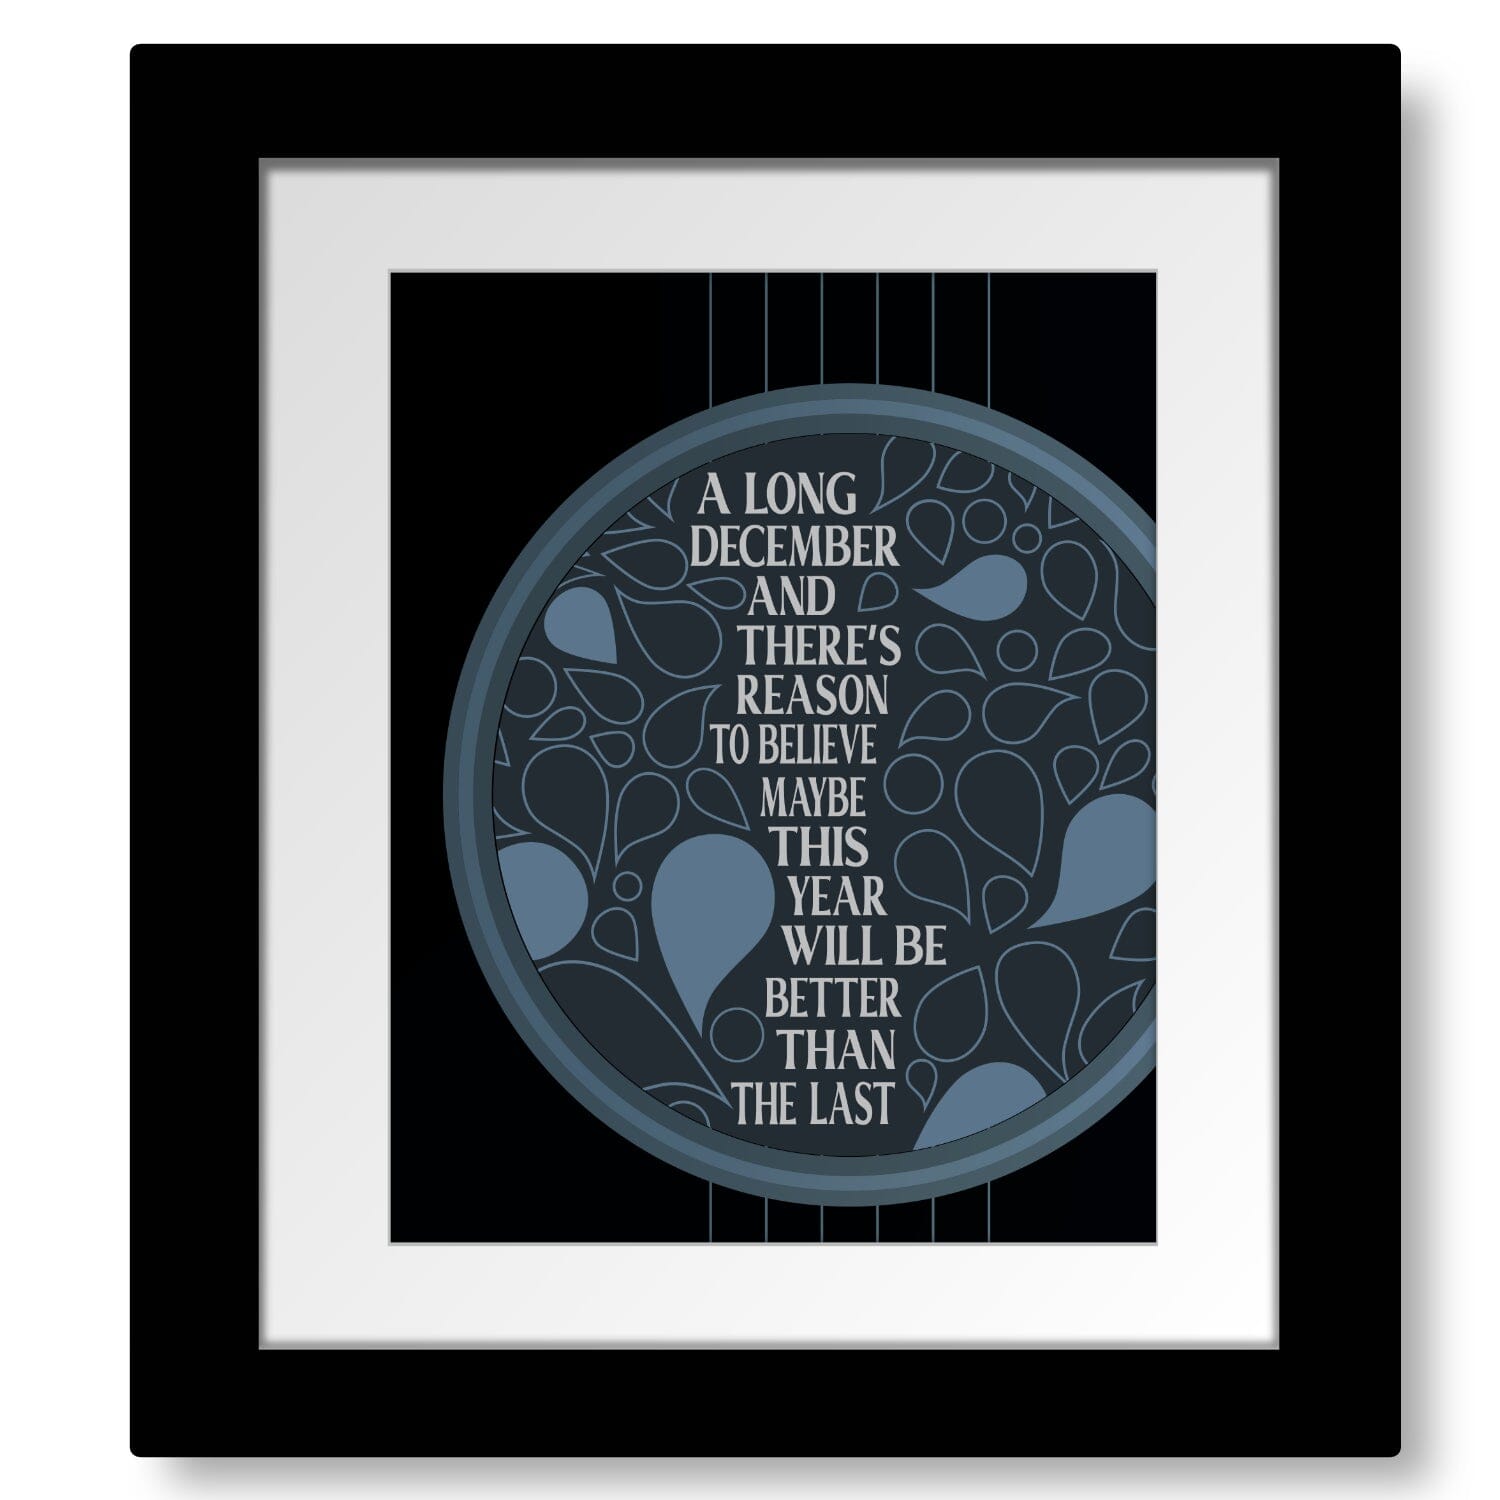 A Long December by the Counting Crows - Song Lyric Print Song Lyrics Art Song Lyrics Art 8x10 Framed and Matted Print 